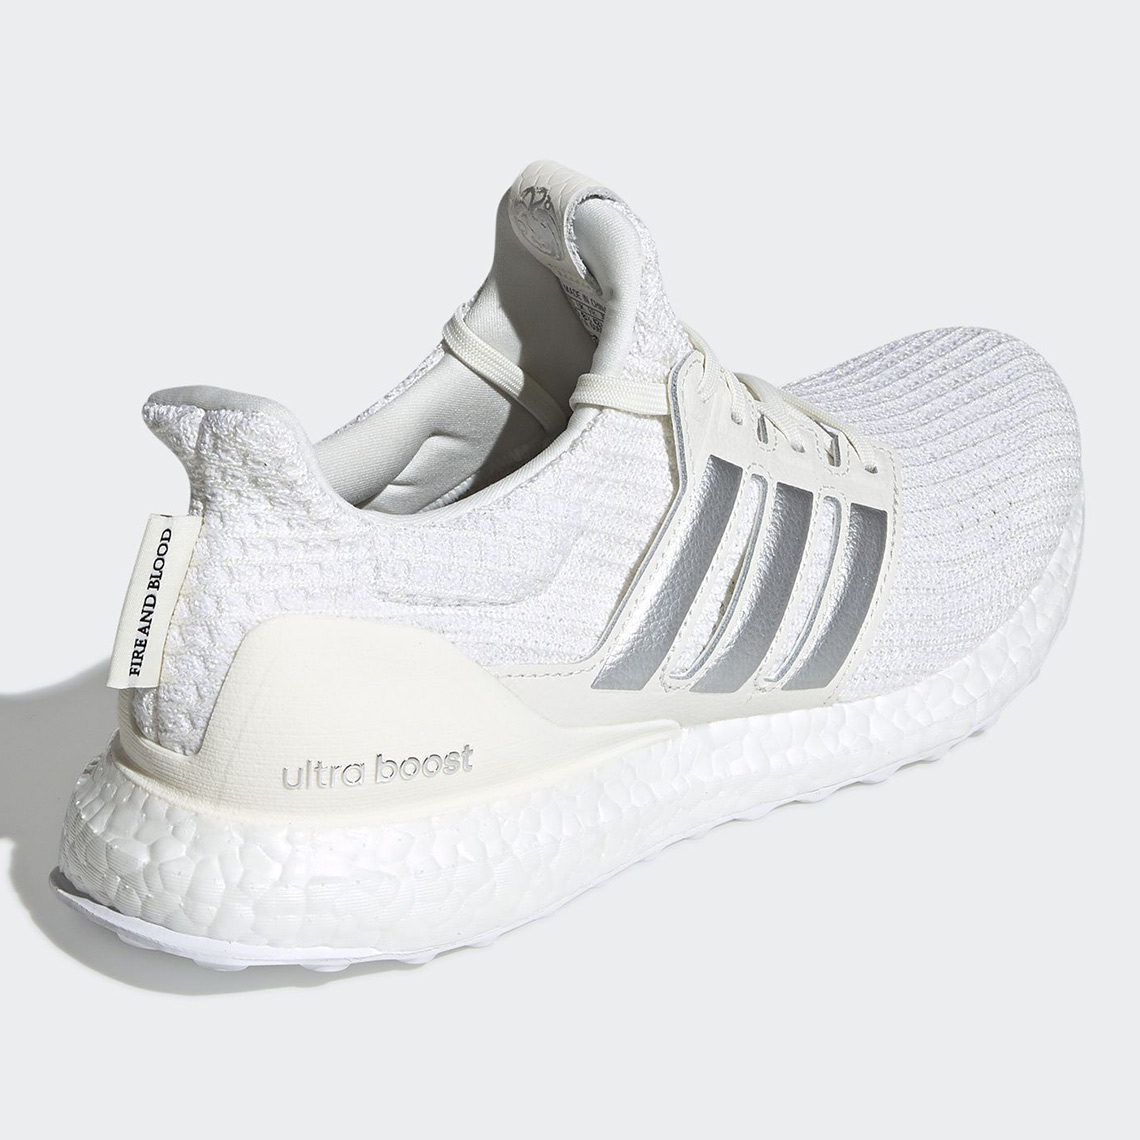 adidas ultra boost mens game of thrones